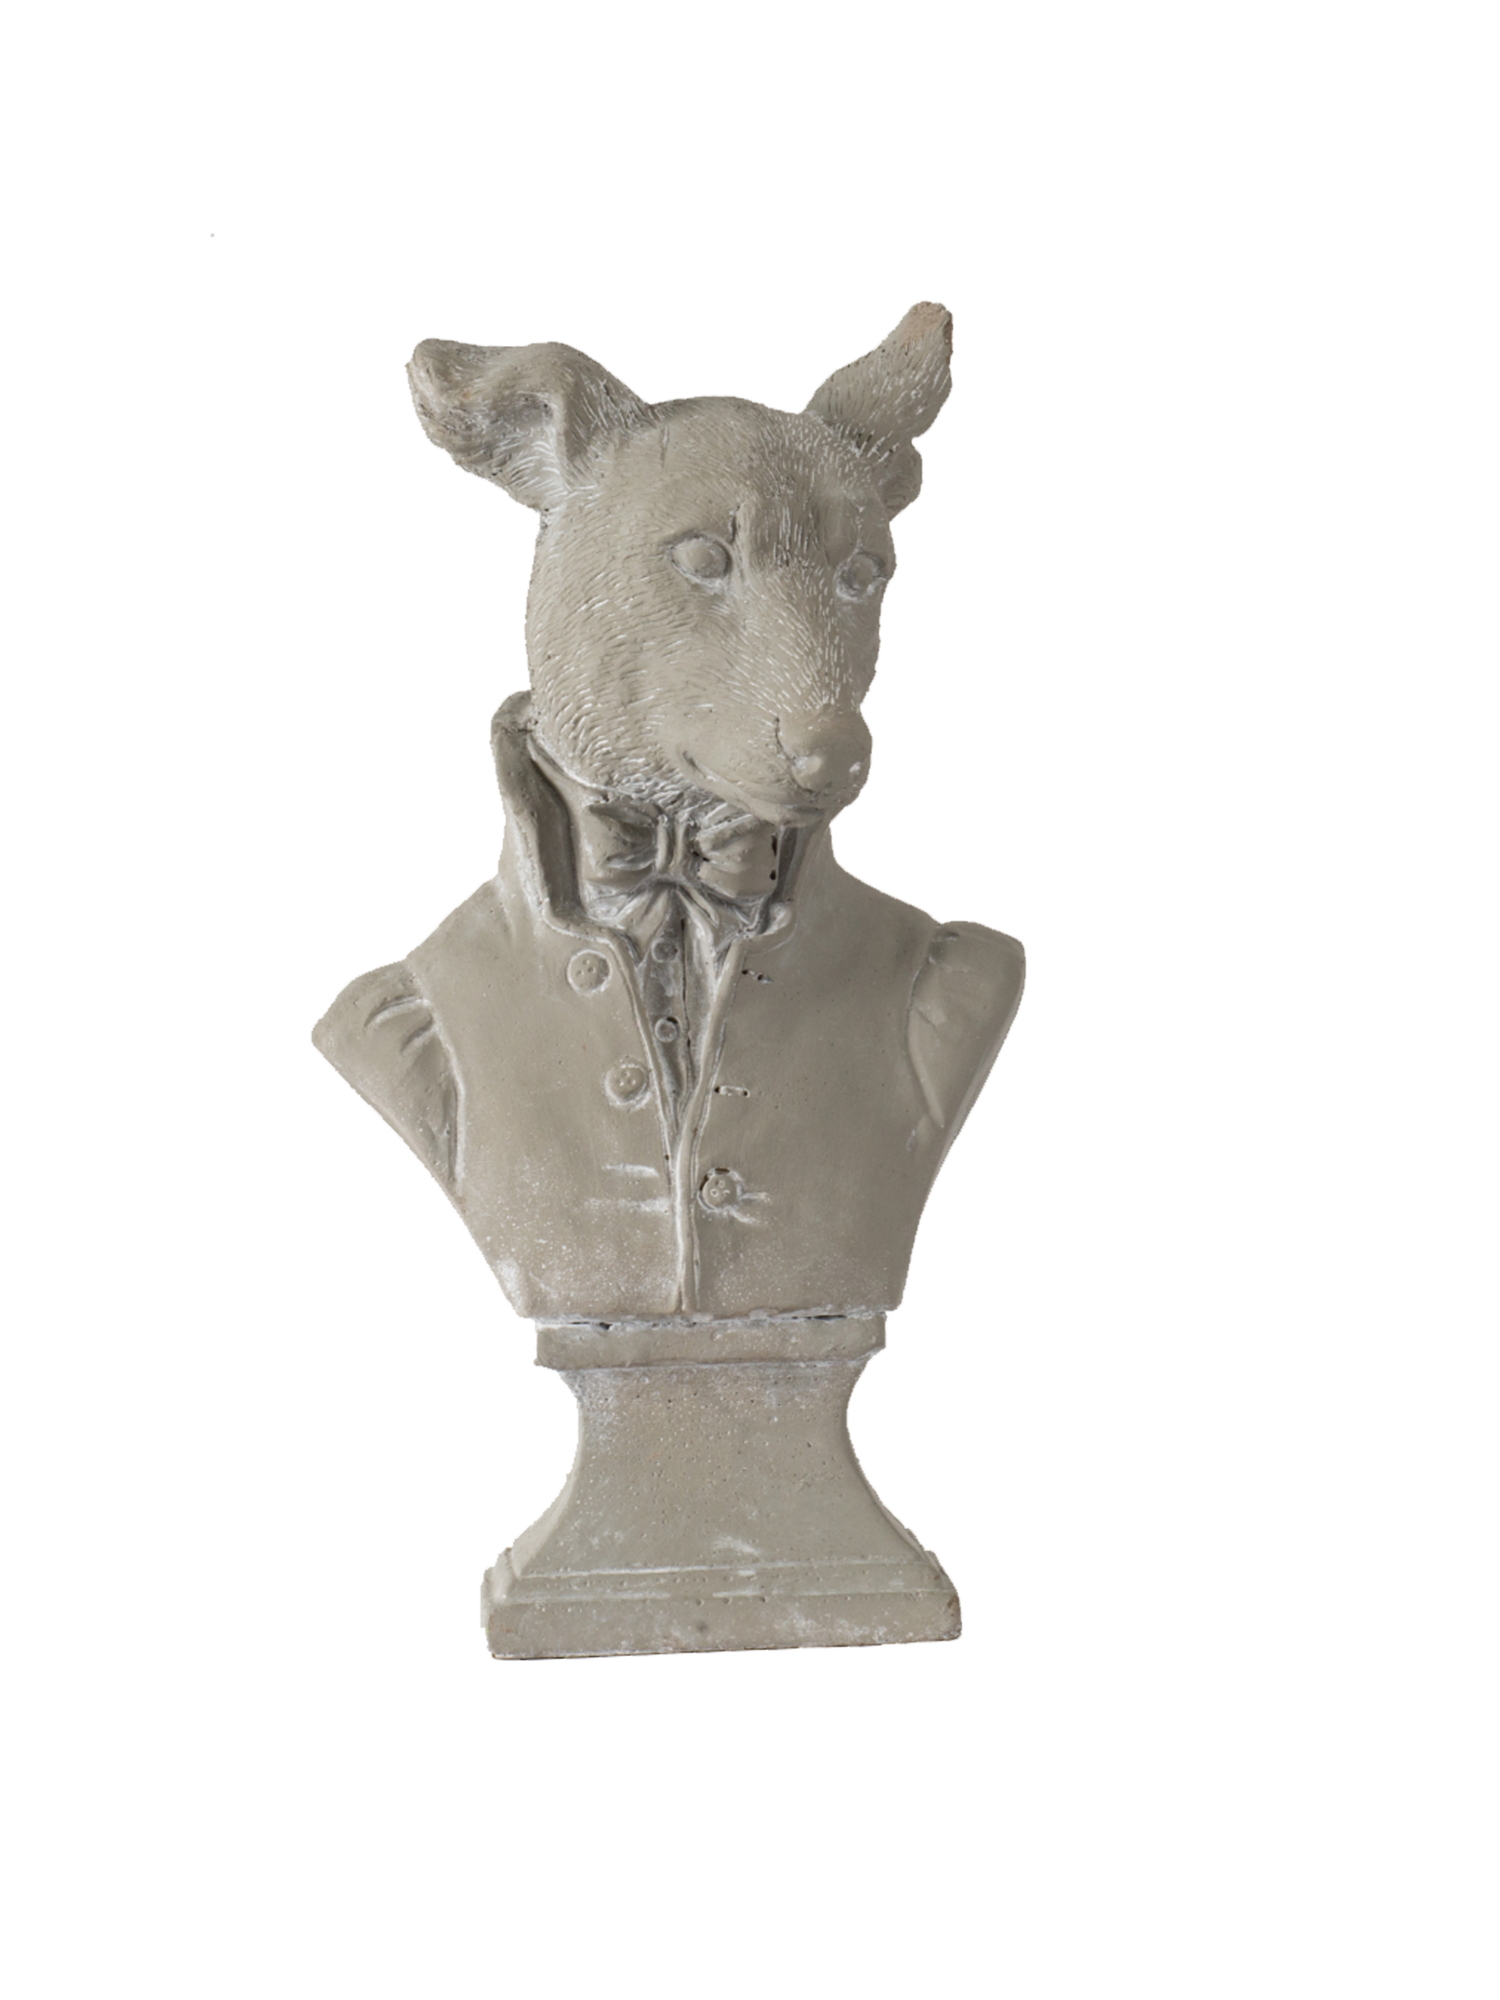 Mr Dog in Suit - Bust